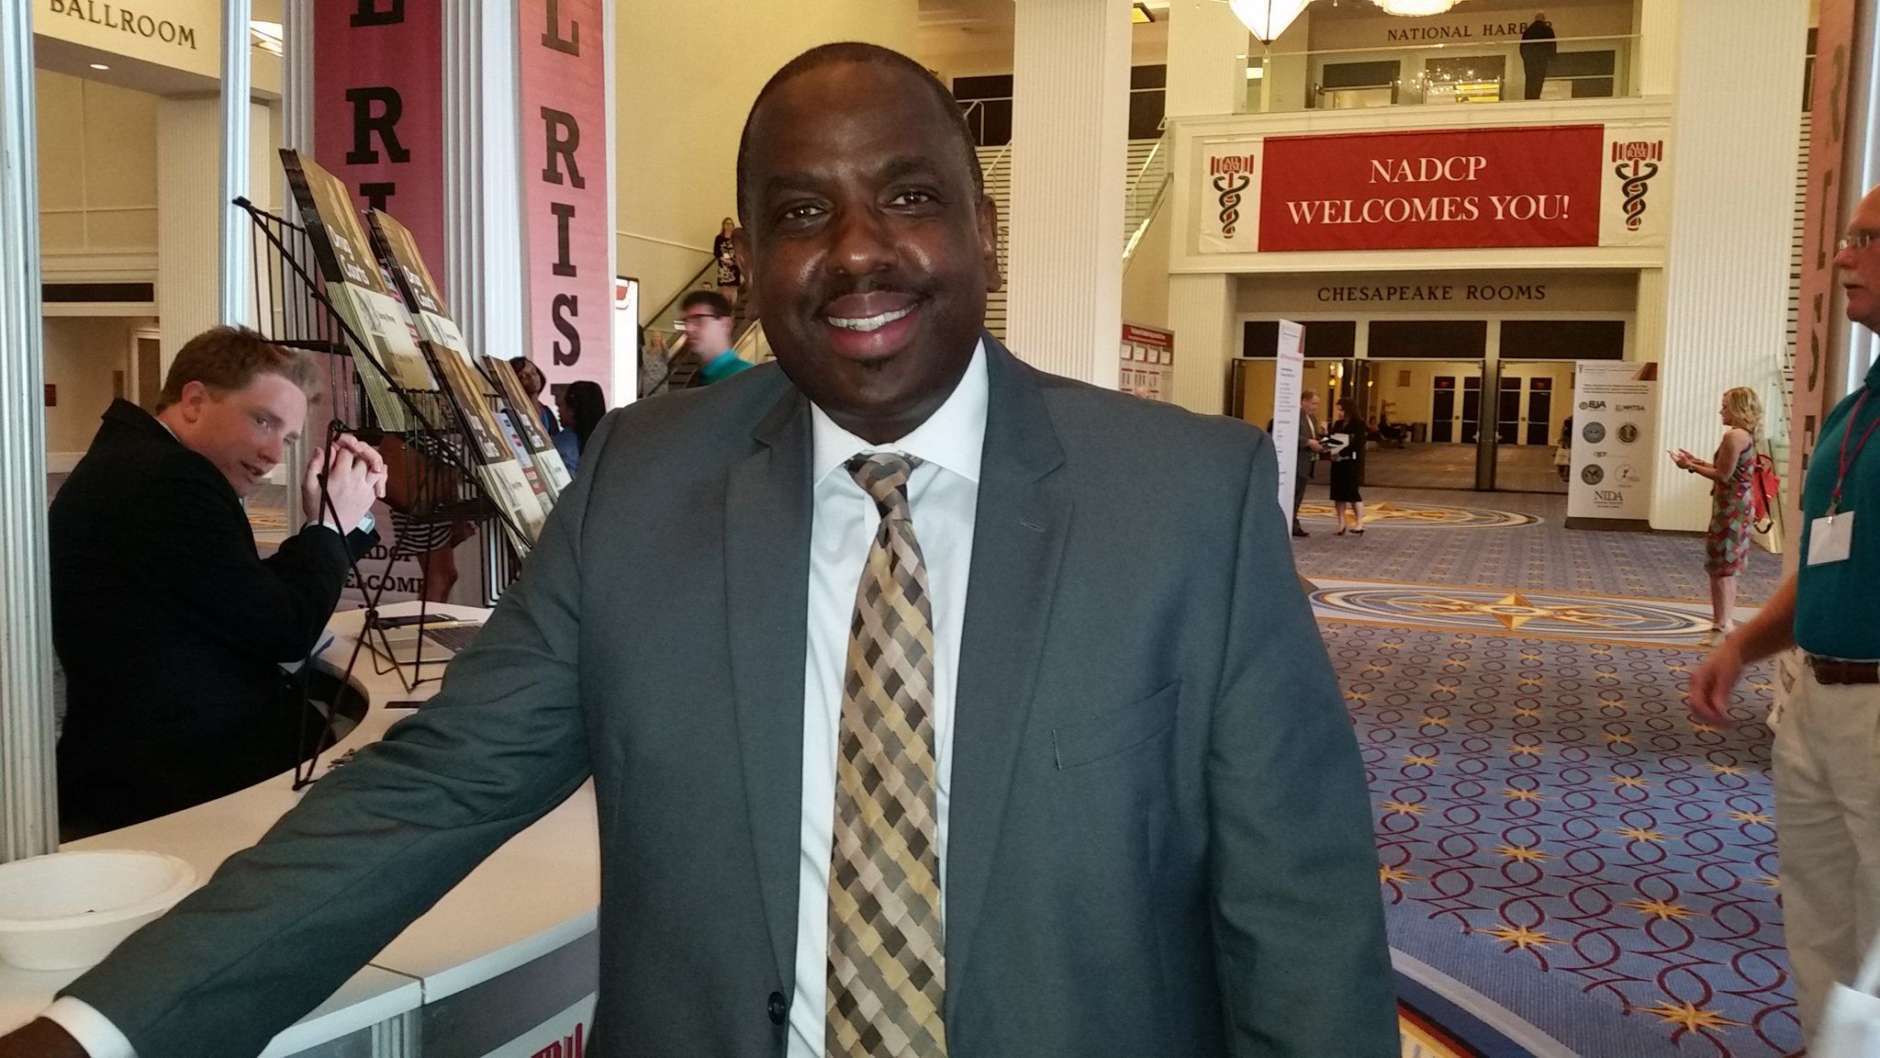 Terrence Walton is with the National Association of Drug Court Professionals at its annual training conference at National Harbor. (WTOP/Kathy Stewart)